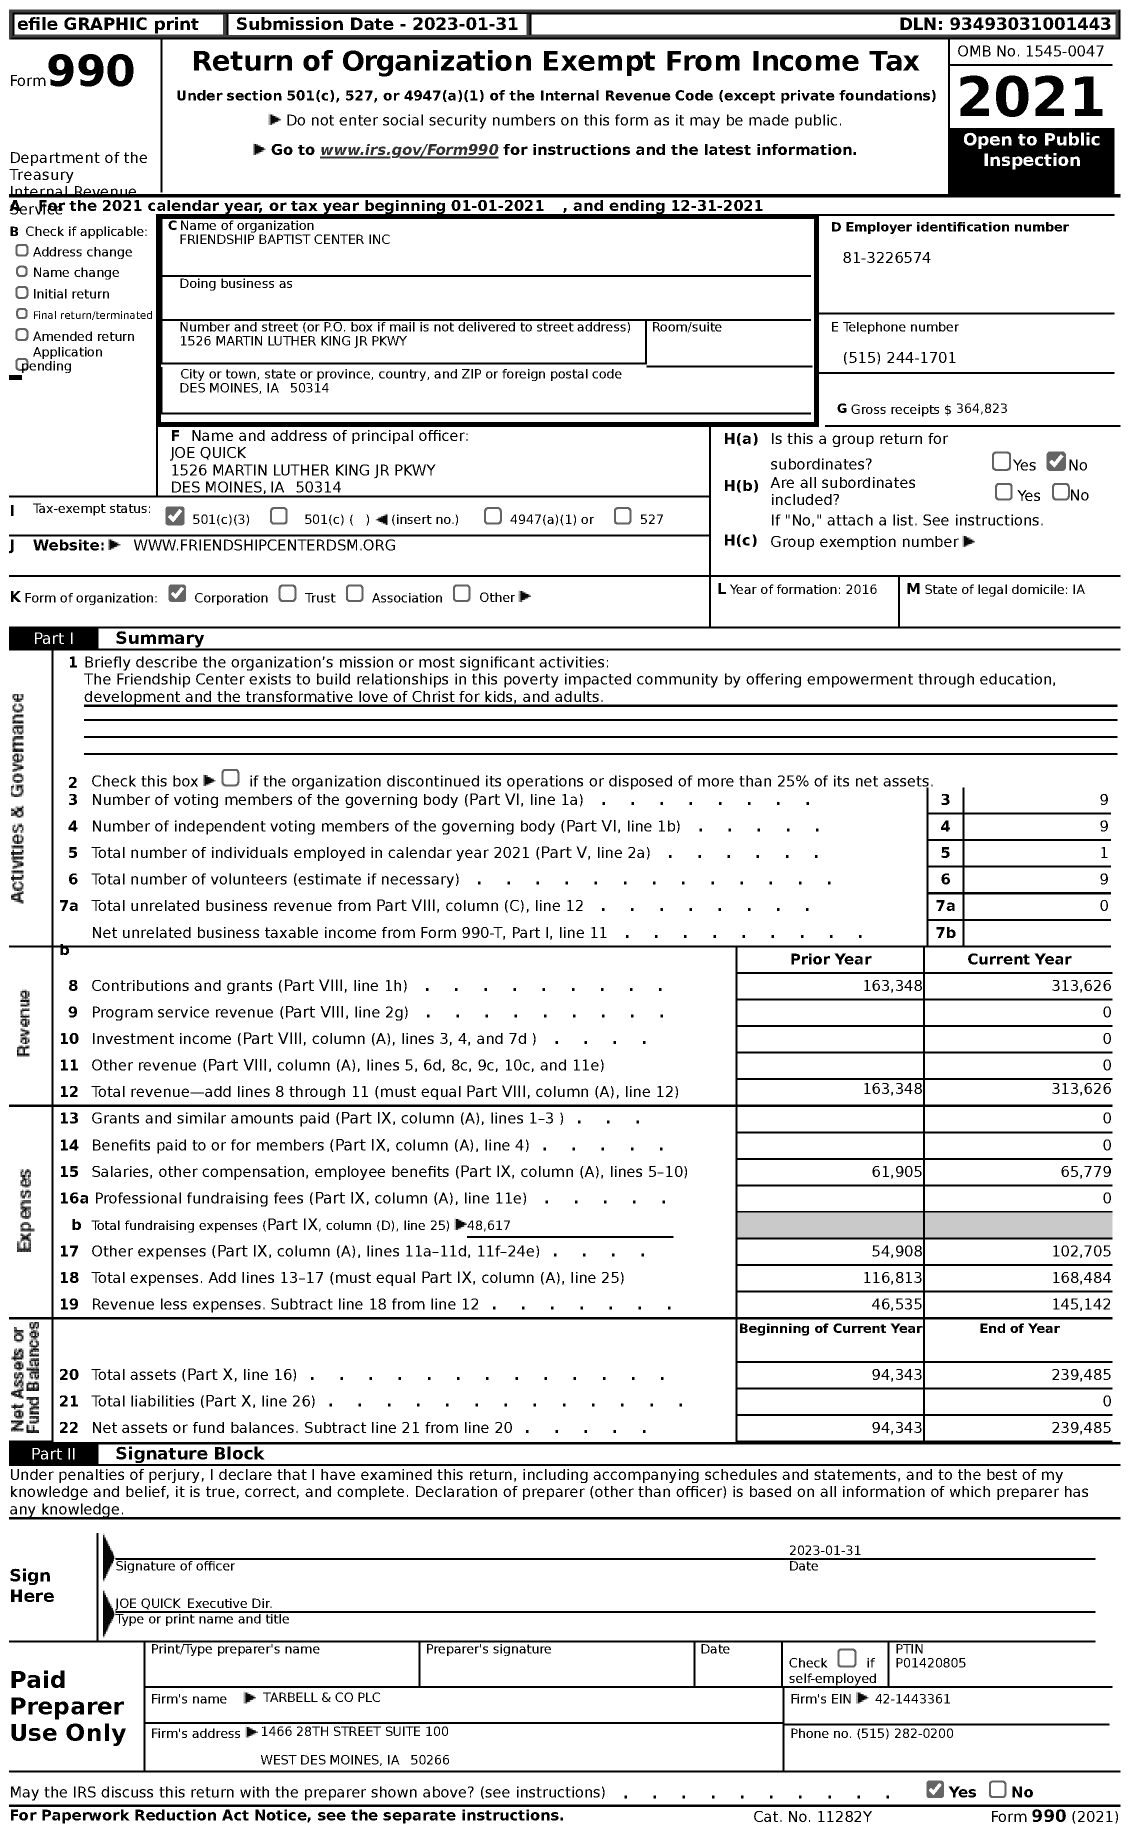 Image of first page of 2021 Form 990 for Friendship Baptist Center